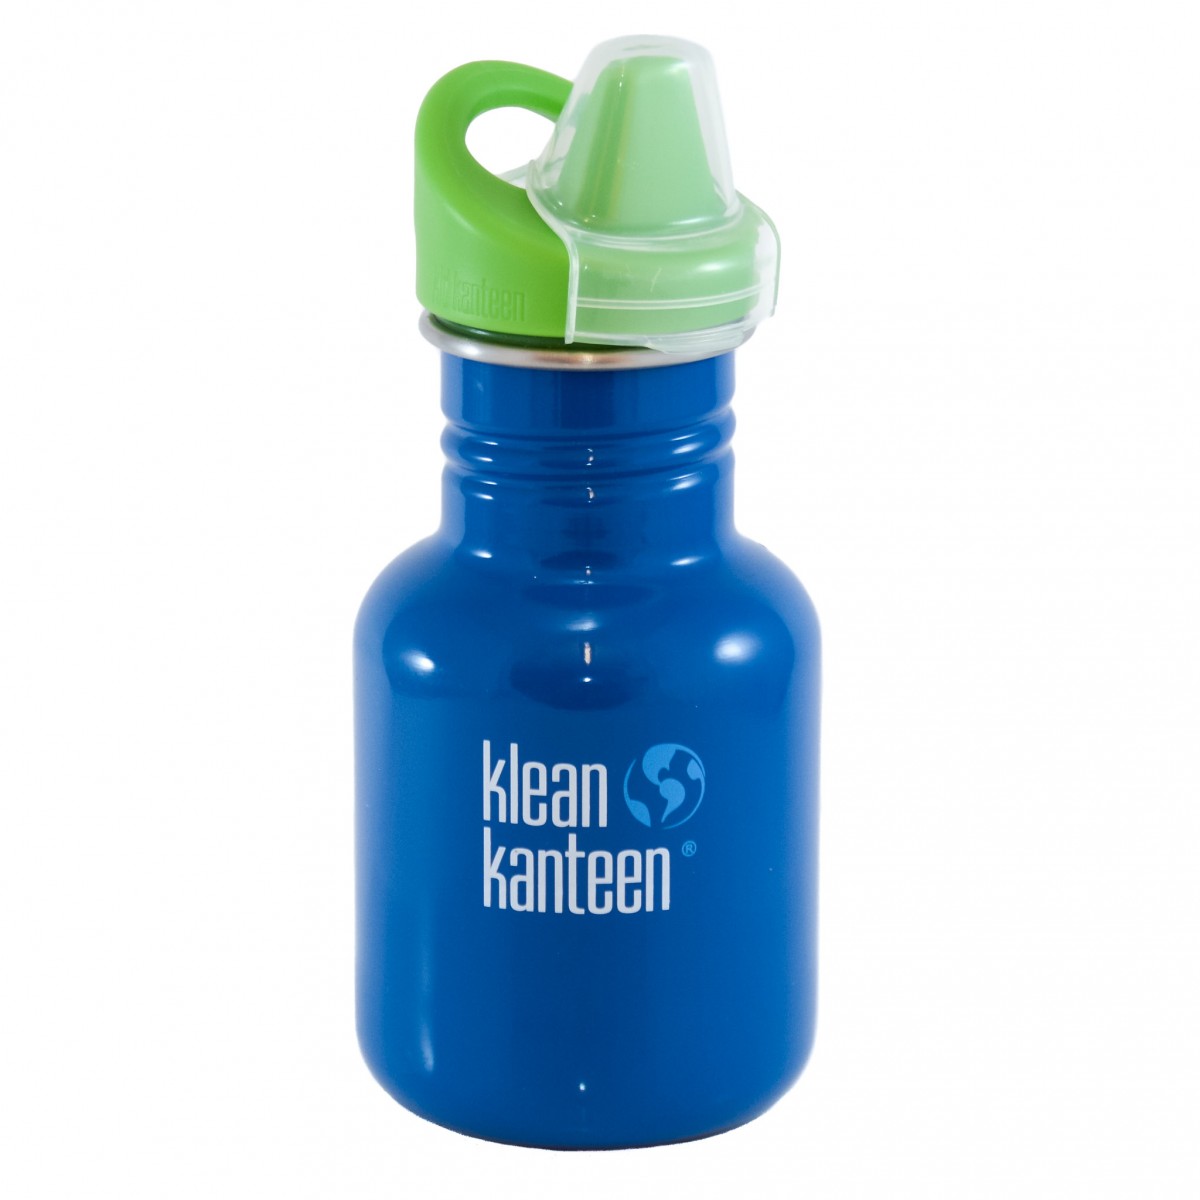 klean kanteen kid classic sippy sippy cup review